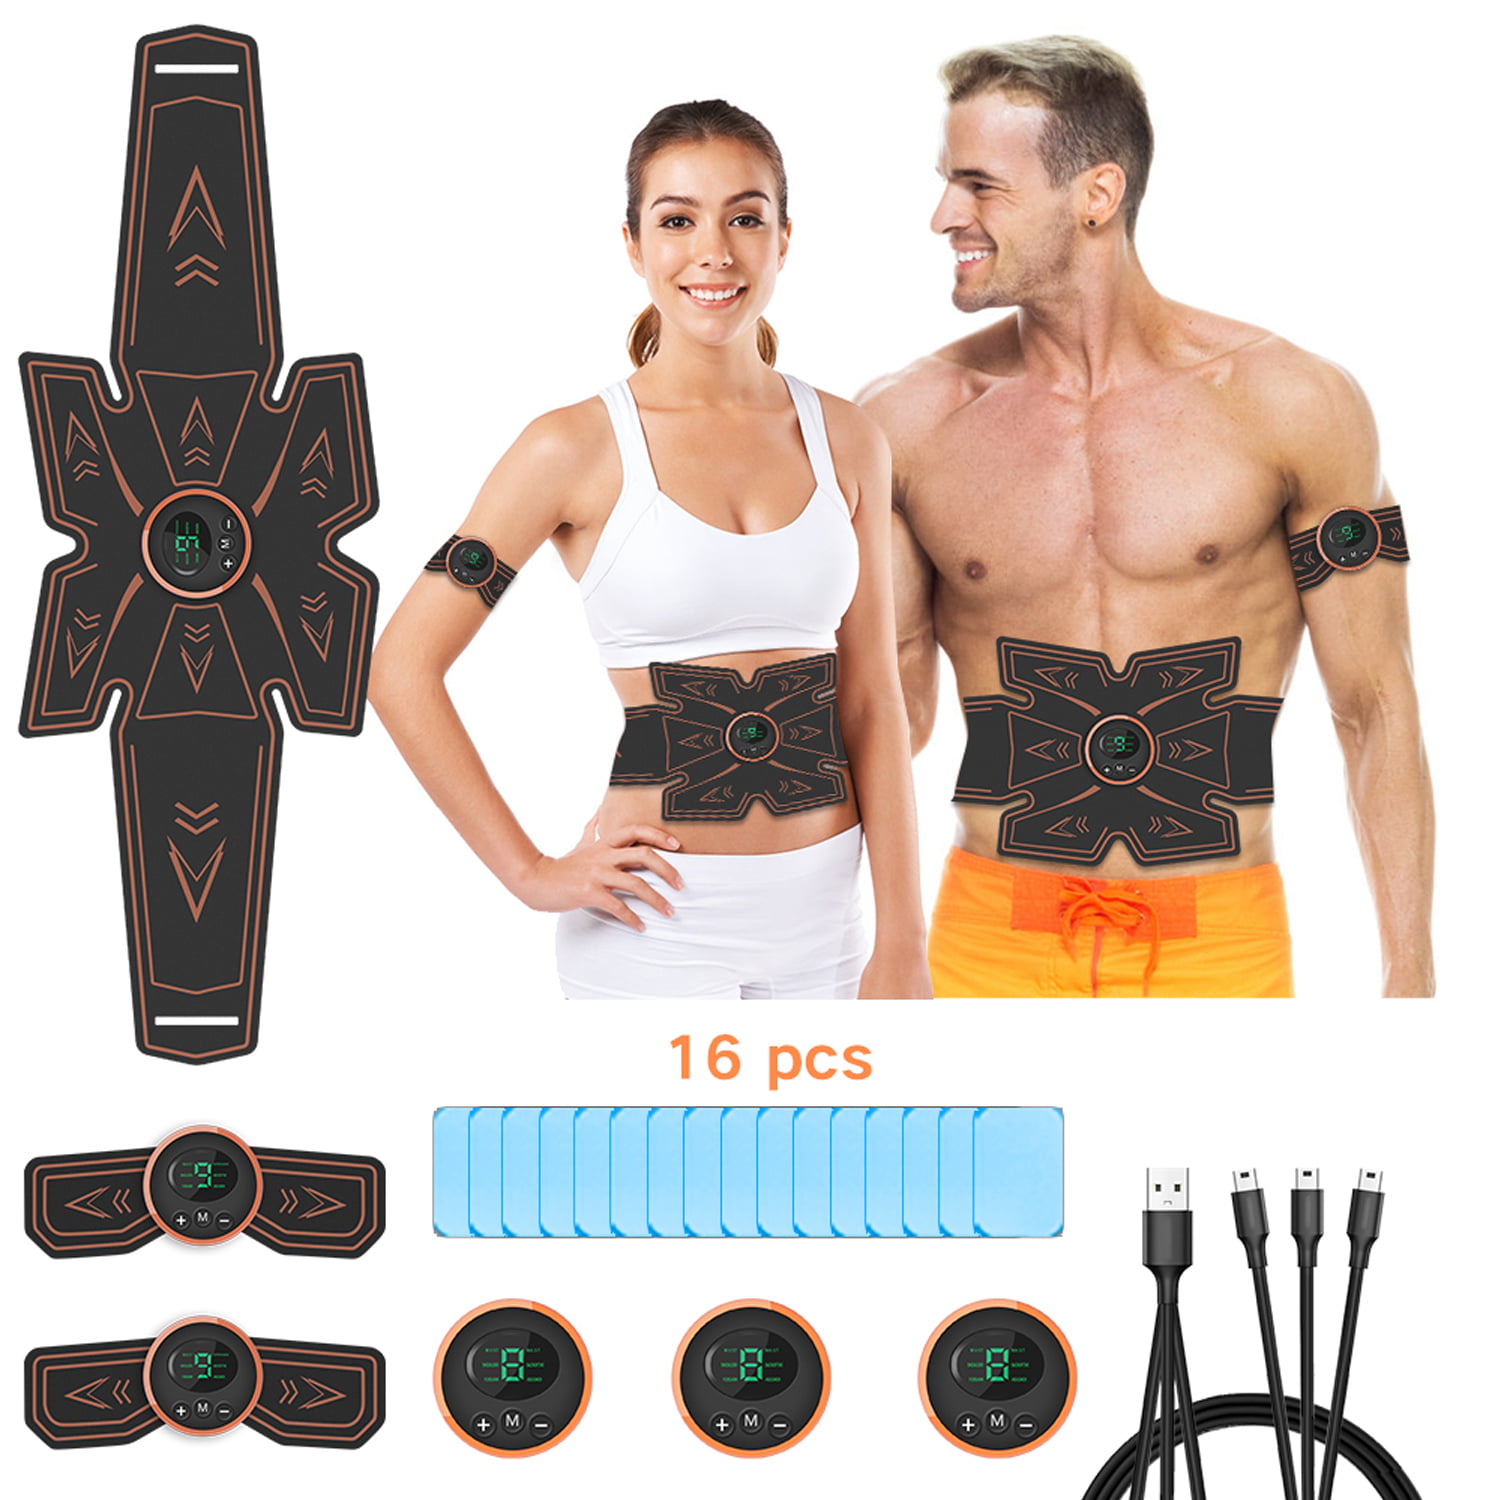 Unisex Smart Wearable Home Office Fitness Equipment for Abdominal/Arm/Leg Abs Abdominal Muscle Trainer 1 Set Segulife Abdominal Muscle Trainer Abs Stimulator Abdominal Muscle Toner 